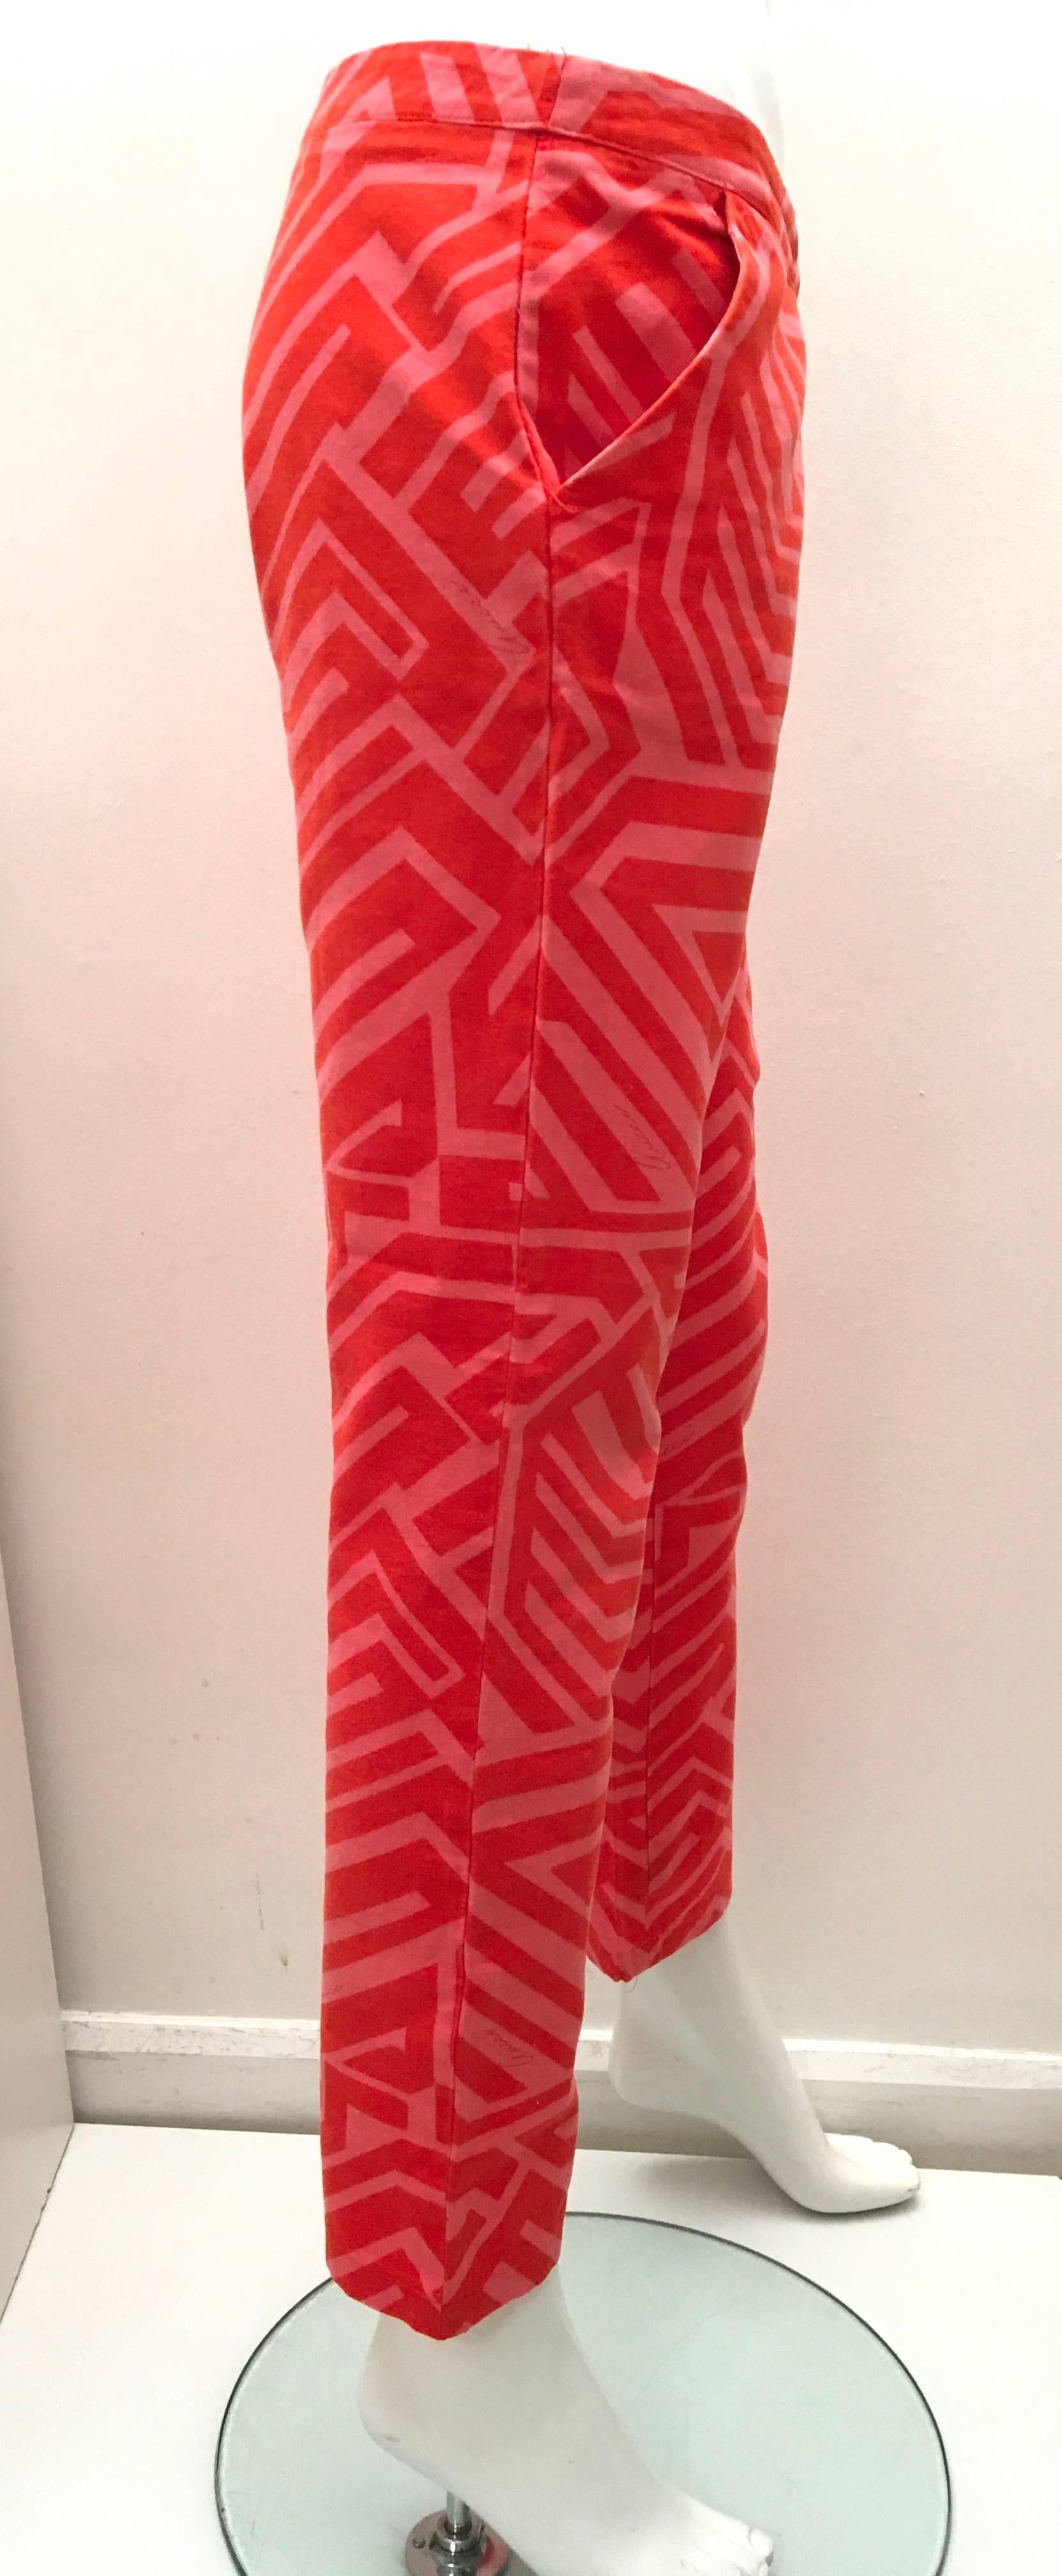 Presented here is a beautiful pair of Gucci pants. The pants are from the 1980's and are made from 100% cotton. The design of the pants consists of a pattern of dark pink geometric lines patterned against a background of solid red. The Gucci